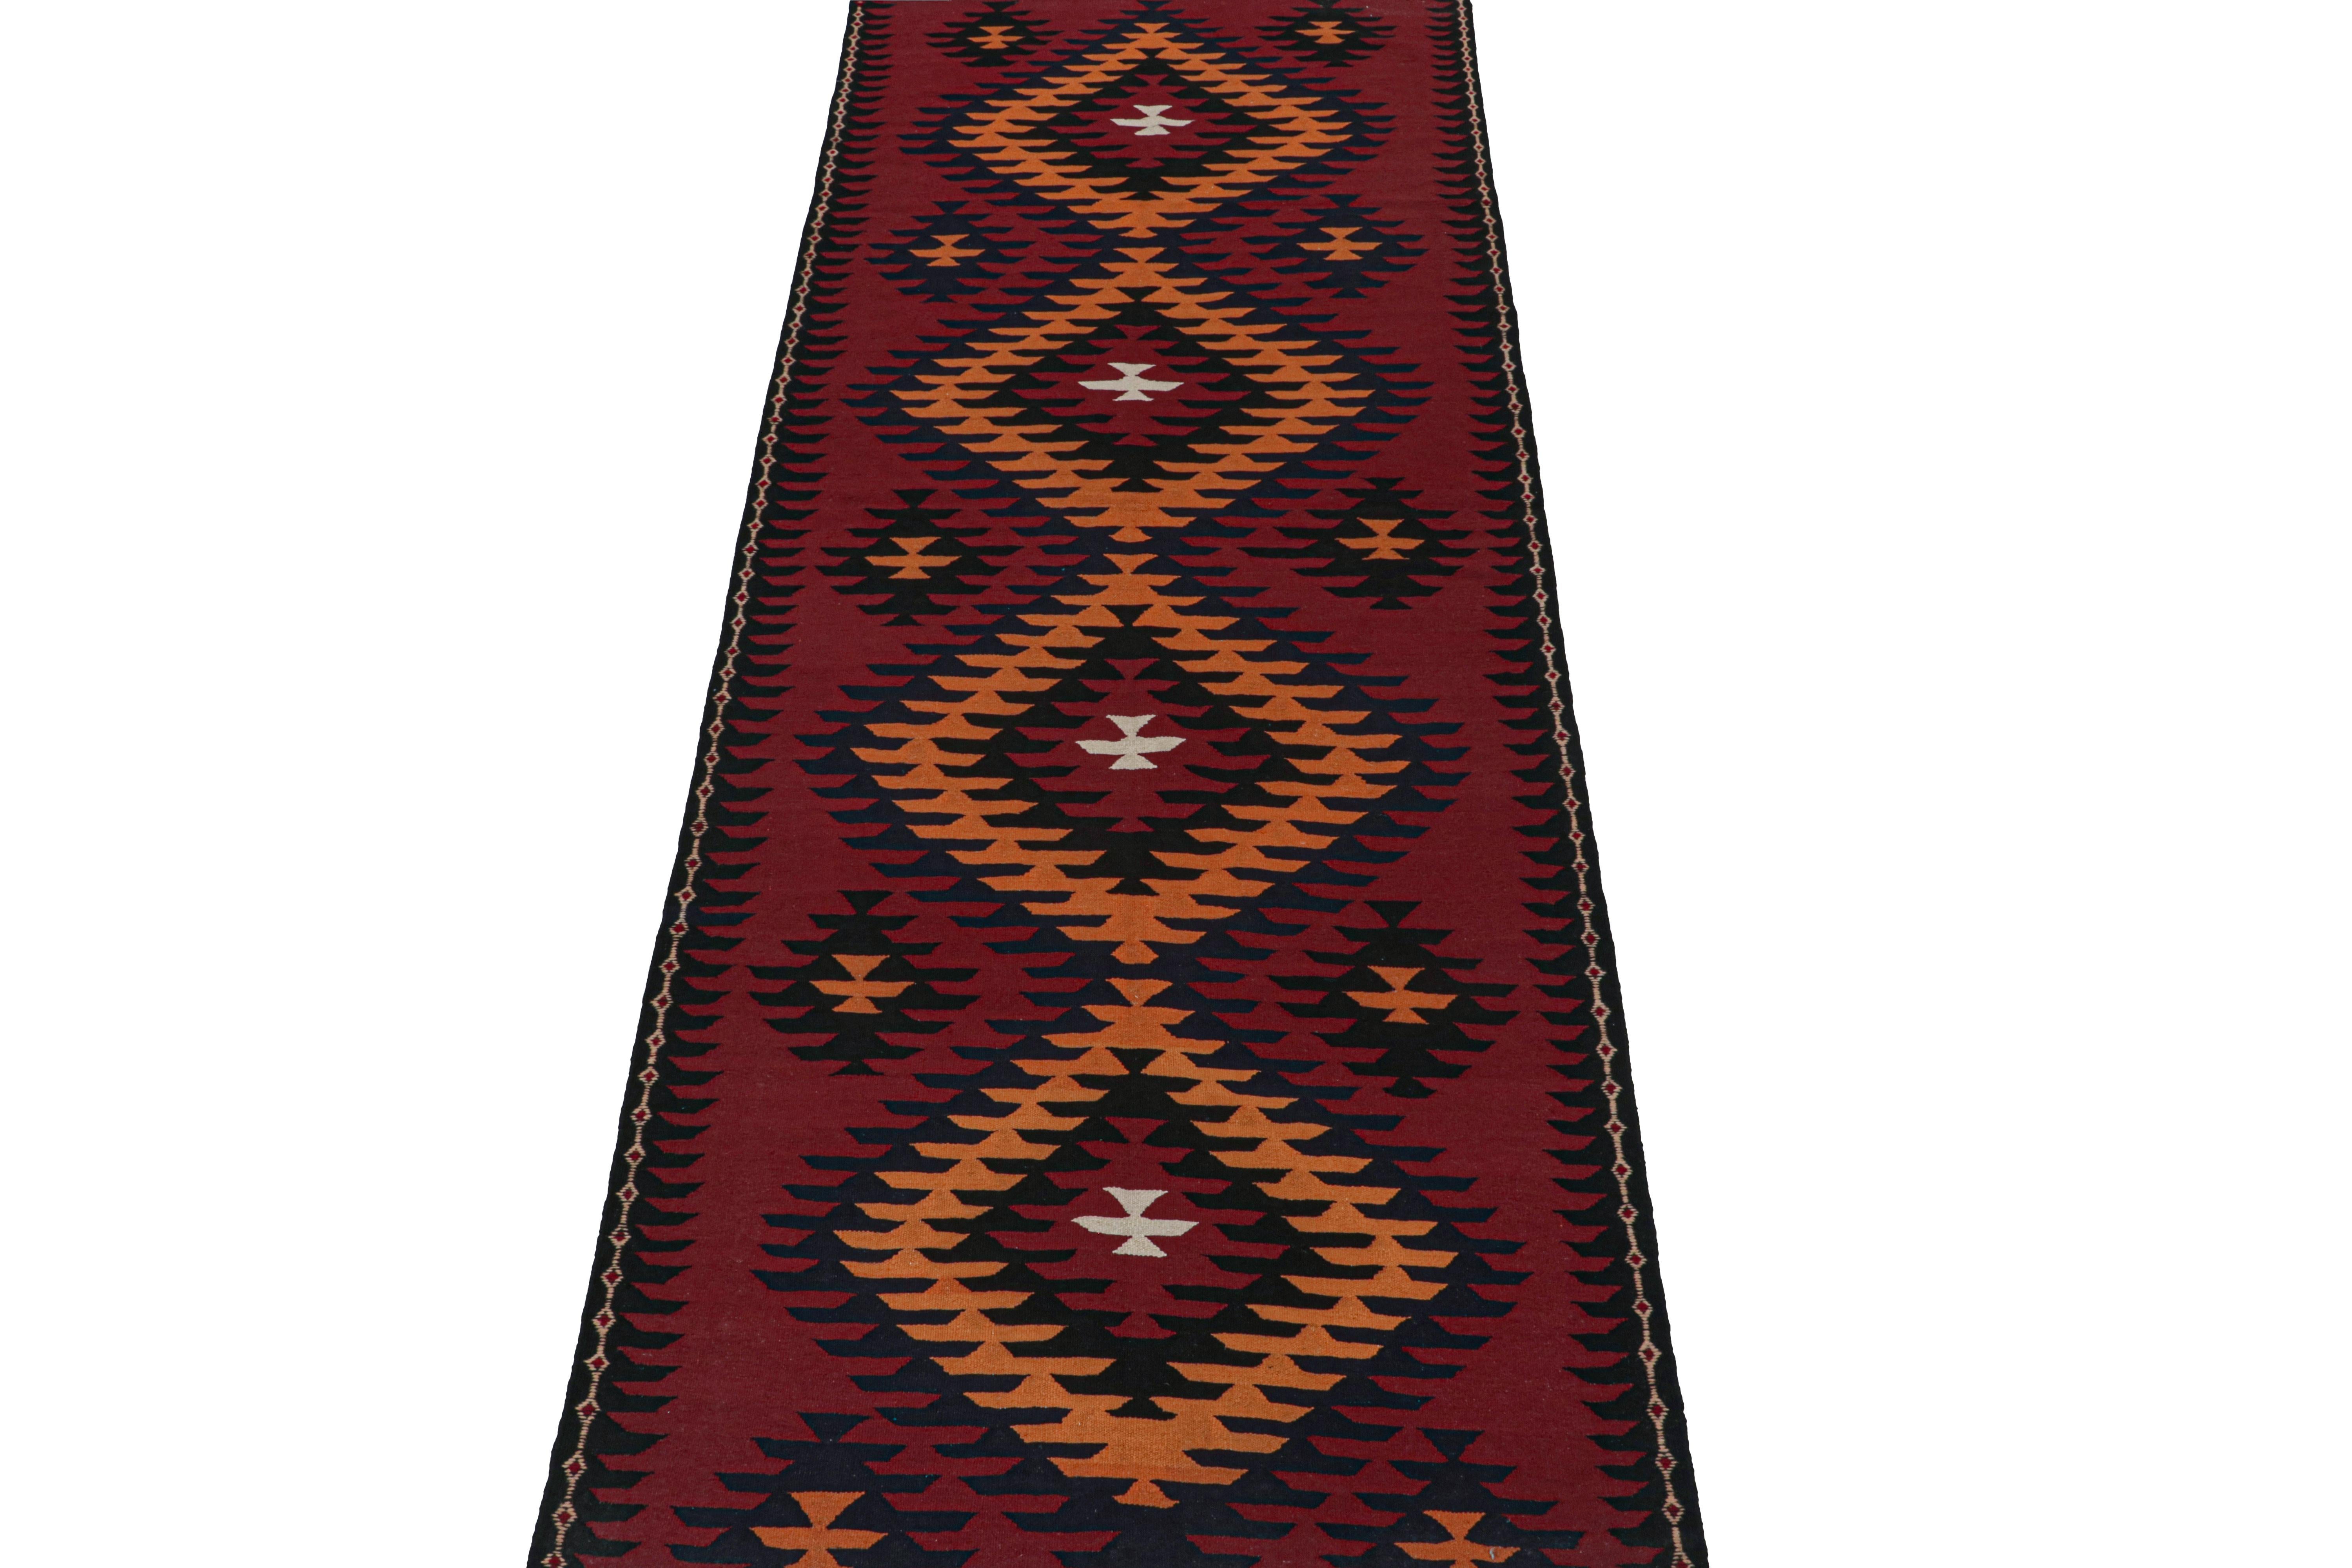 This vintage 5x14 Persian Kilim is believed to be a tribal gallery runner from Meshkin—a small Northwest 

Persian village known for its fabulous works. Handwoven in wool, it originates circa 1950-1960. 
Its design favors a clean approach to